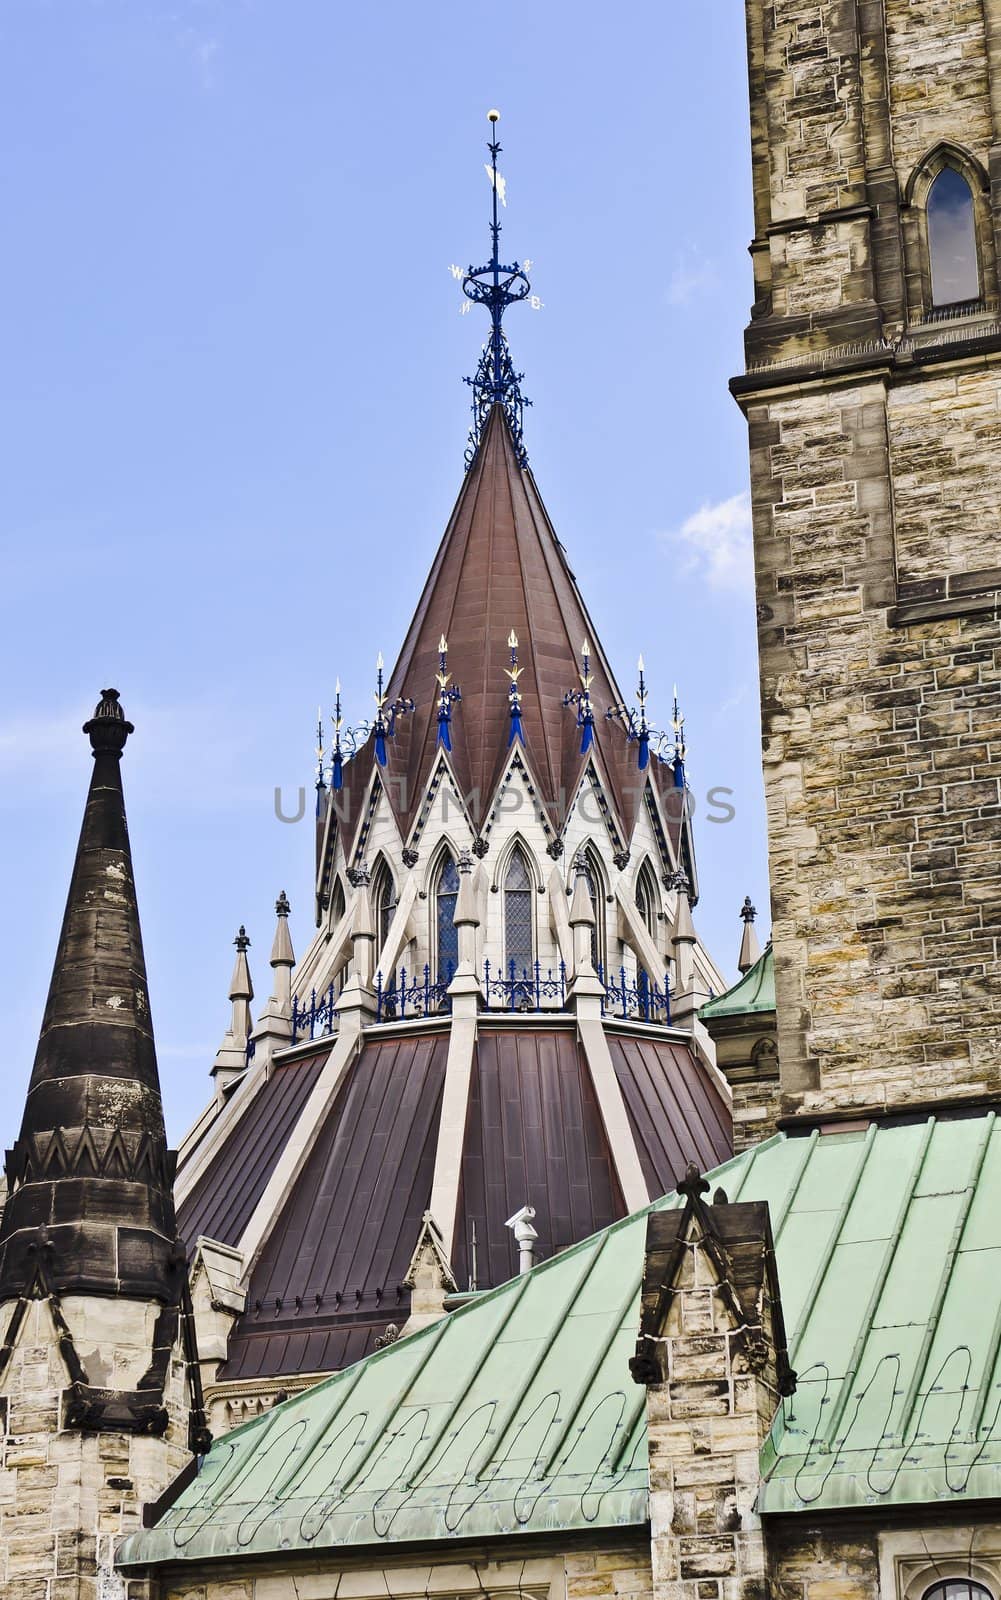 The peak of the Library of Parliament architecture with weather vane, behind the Centre block.